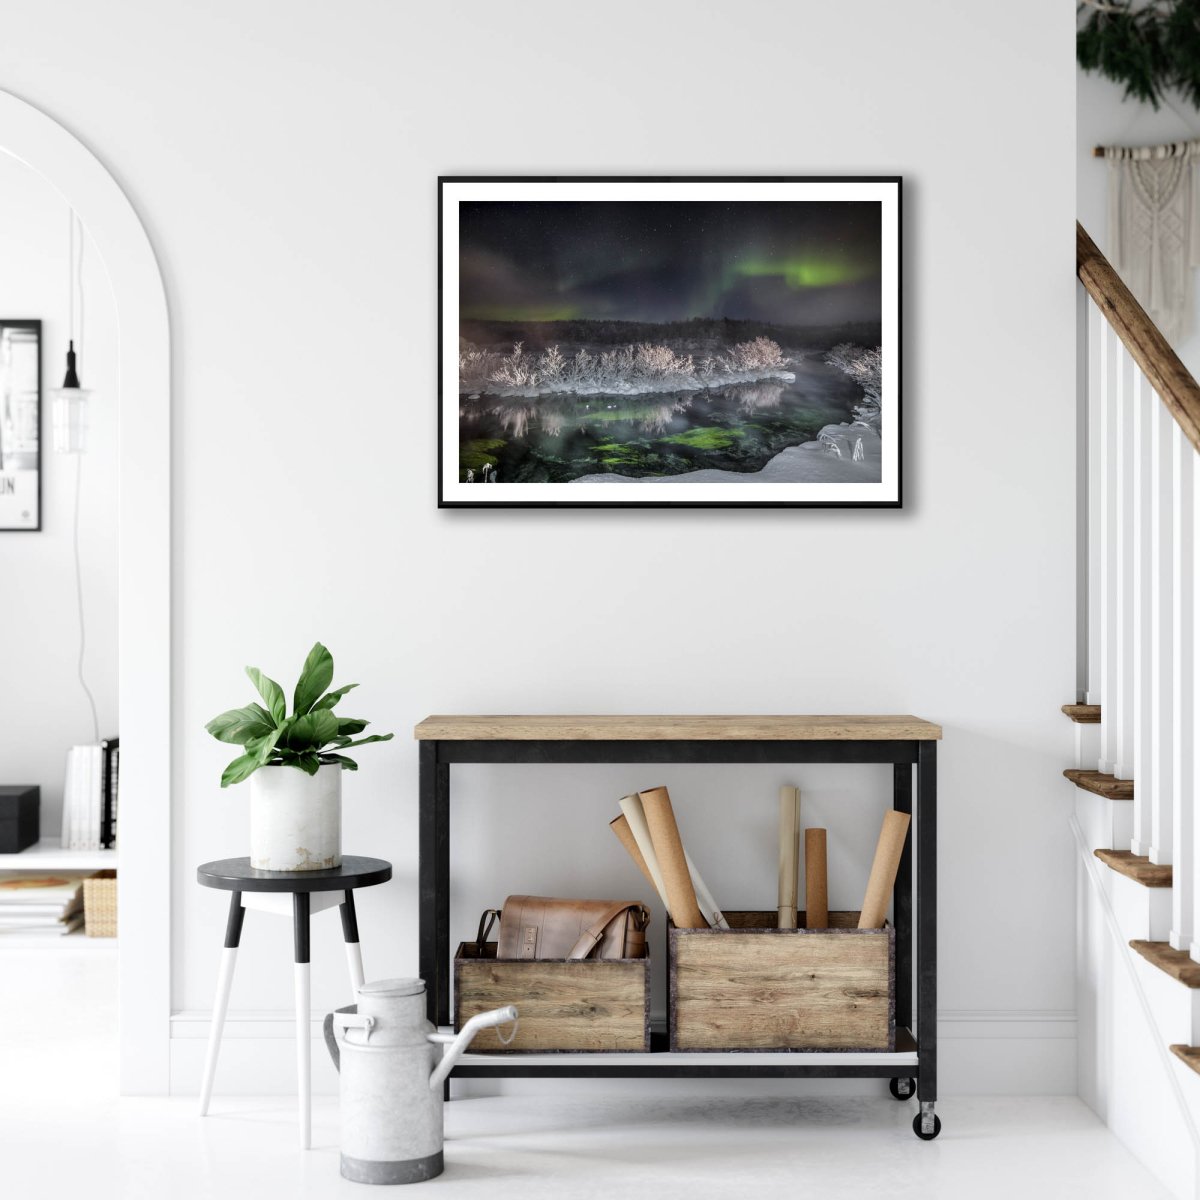 Framed photo of Northern Lights over steaming Arctic river, white living room wall above desk.